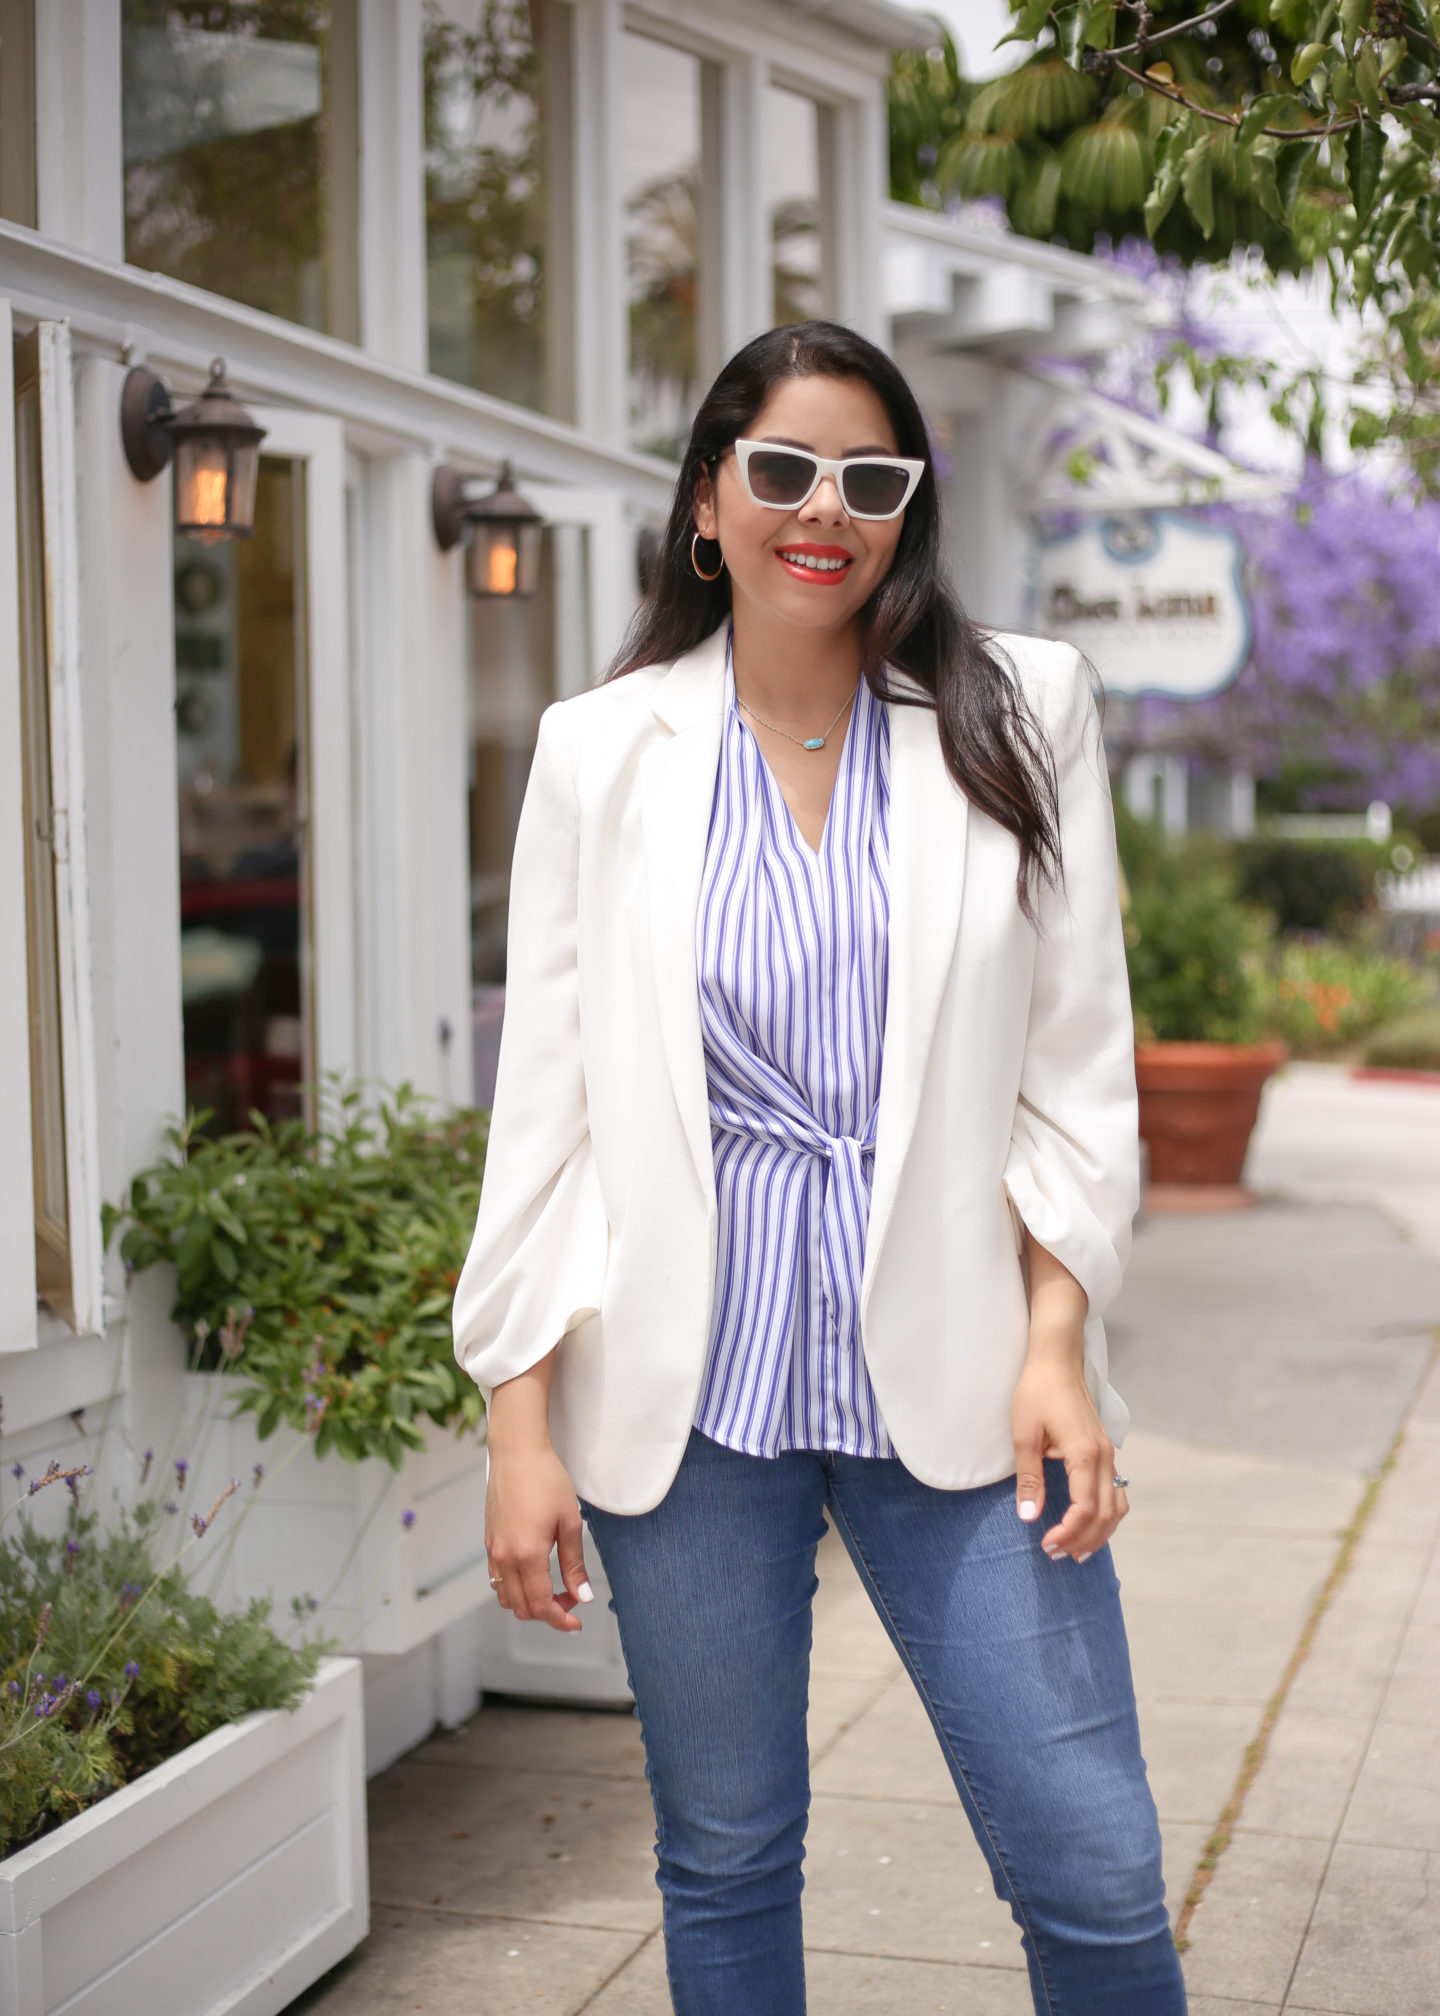 Casual yet Elegant Outfit + Talkin' flattering style - Lil bits of Chic